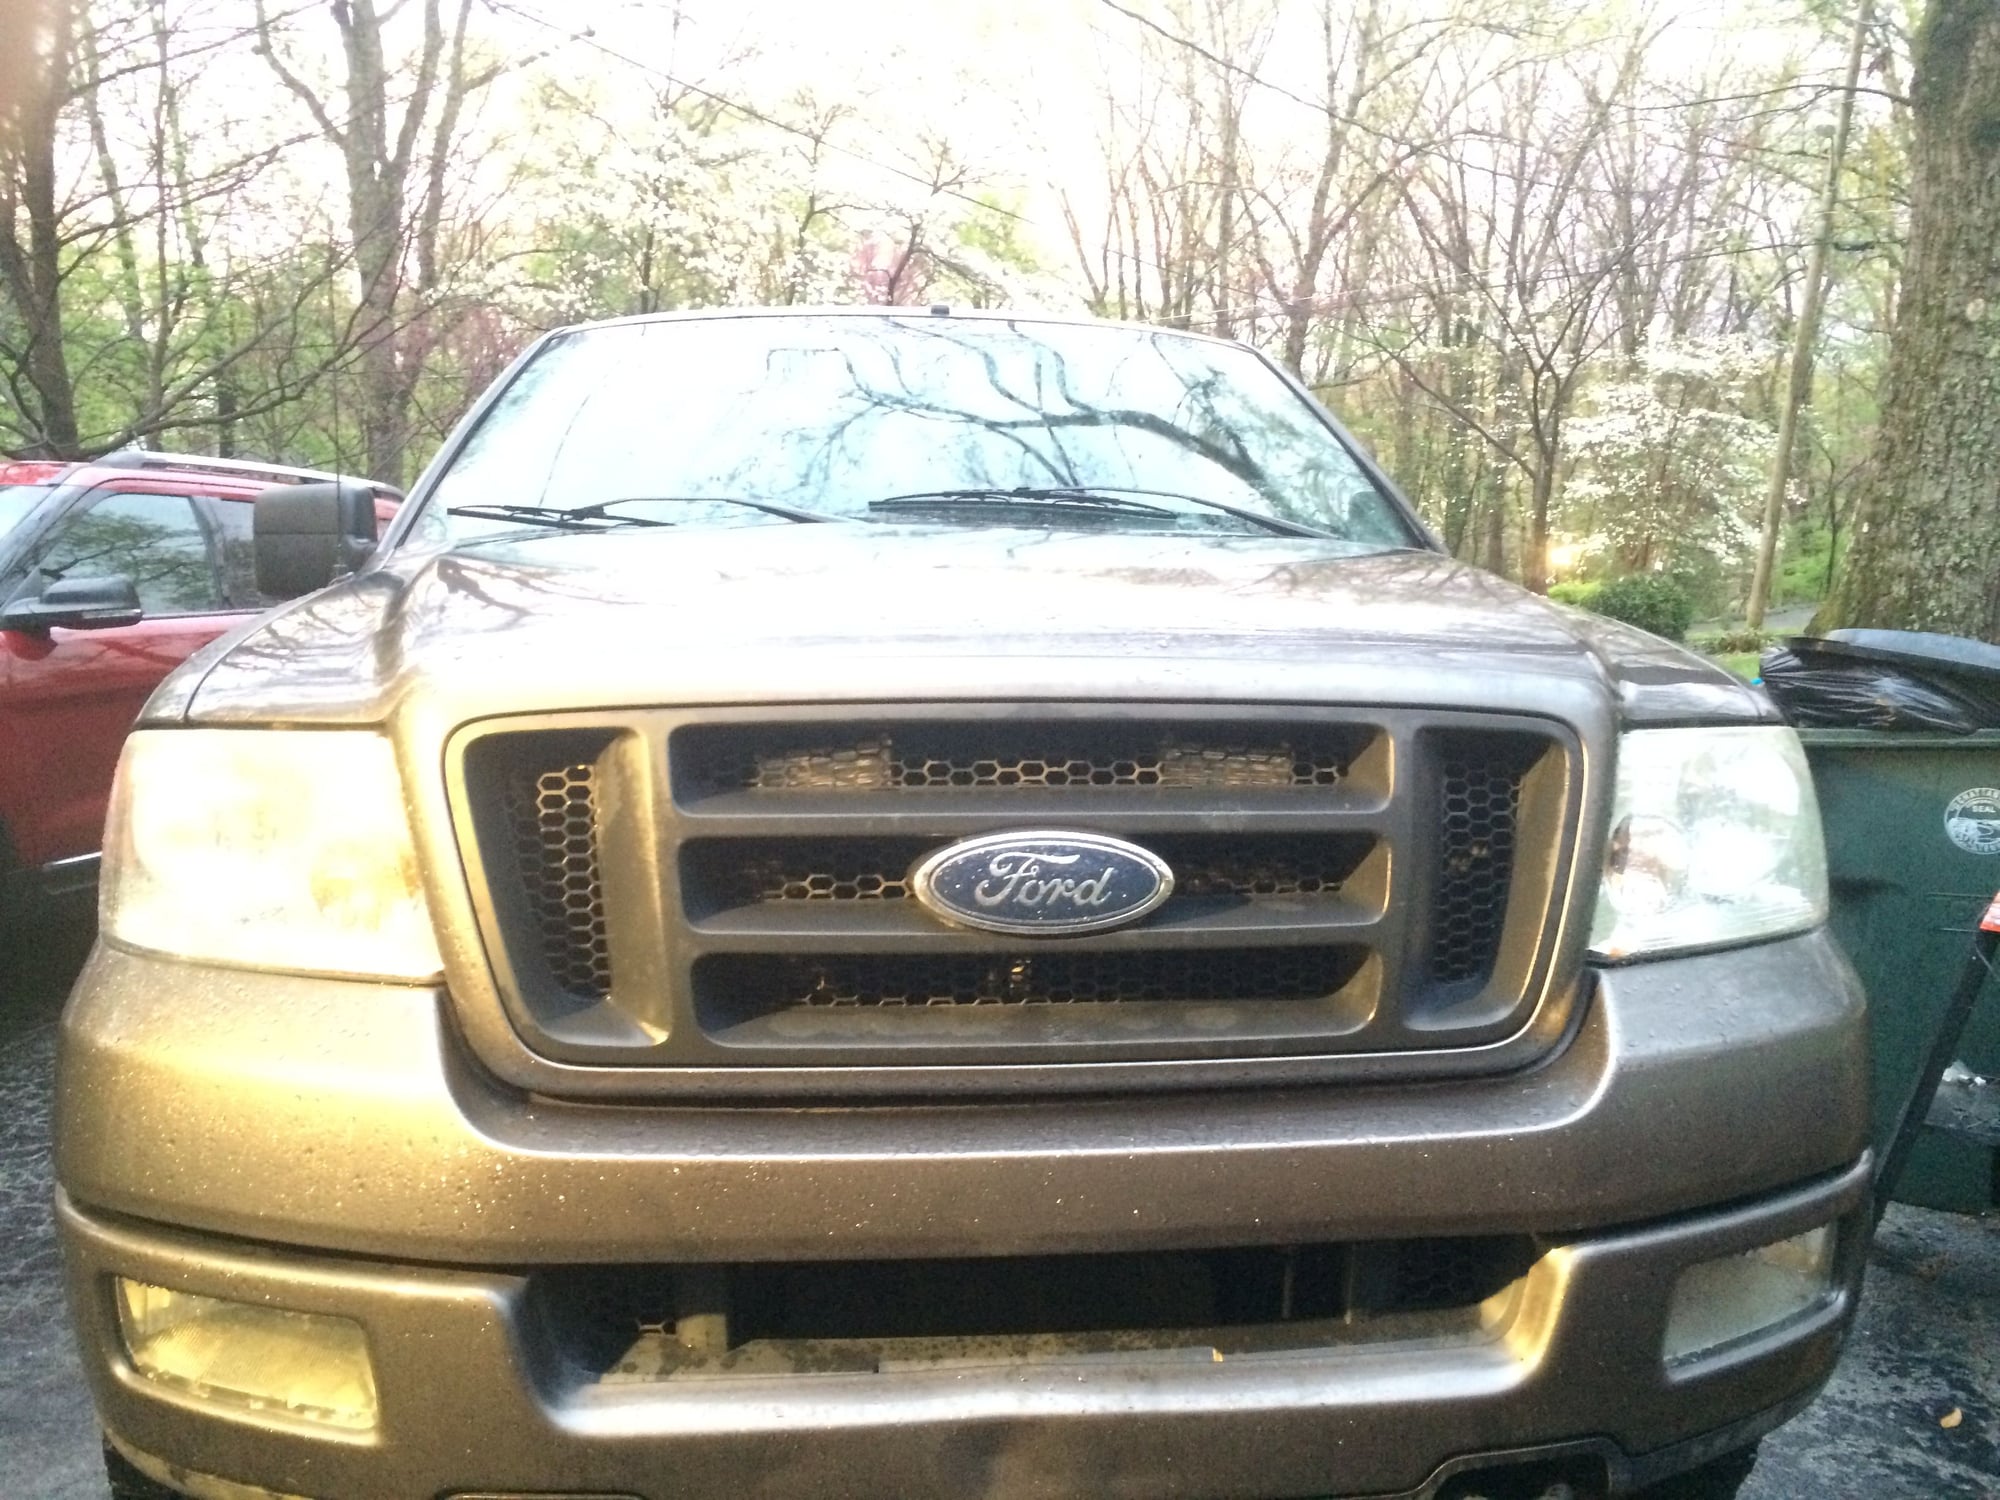 No brake lights/ Rear turn indicators - Ford F150 Forum - Community of Ford Truck Fans 2013 Ford F150 Rear Running Lights Not Working